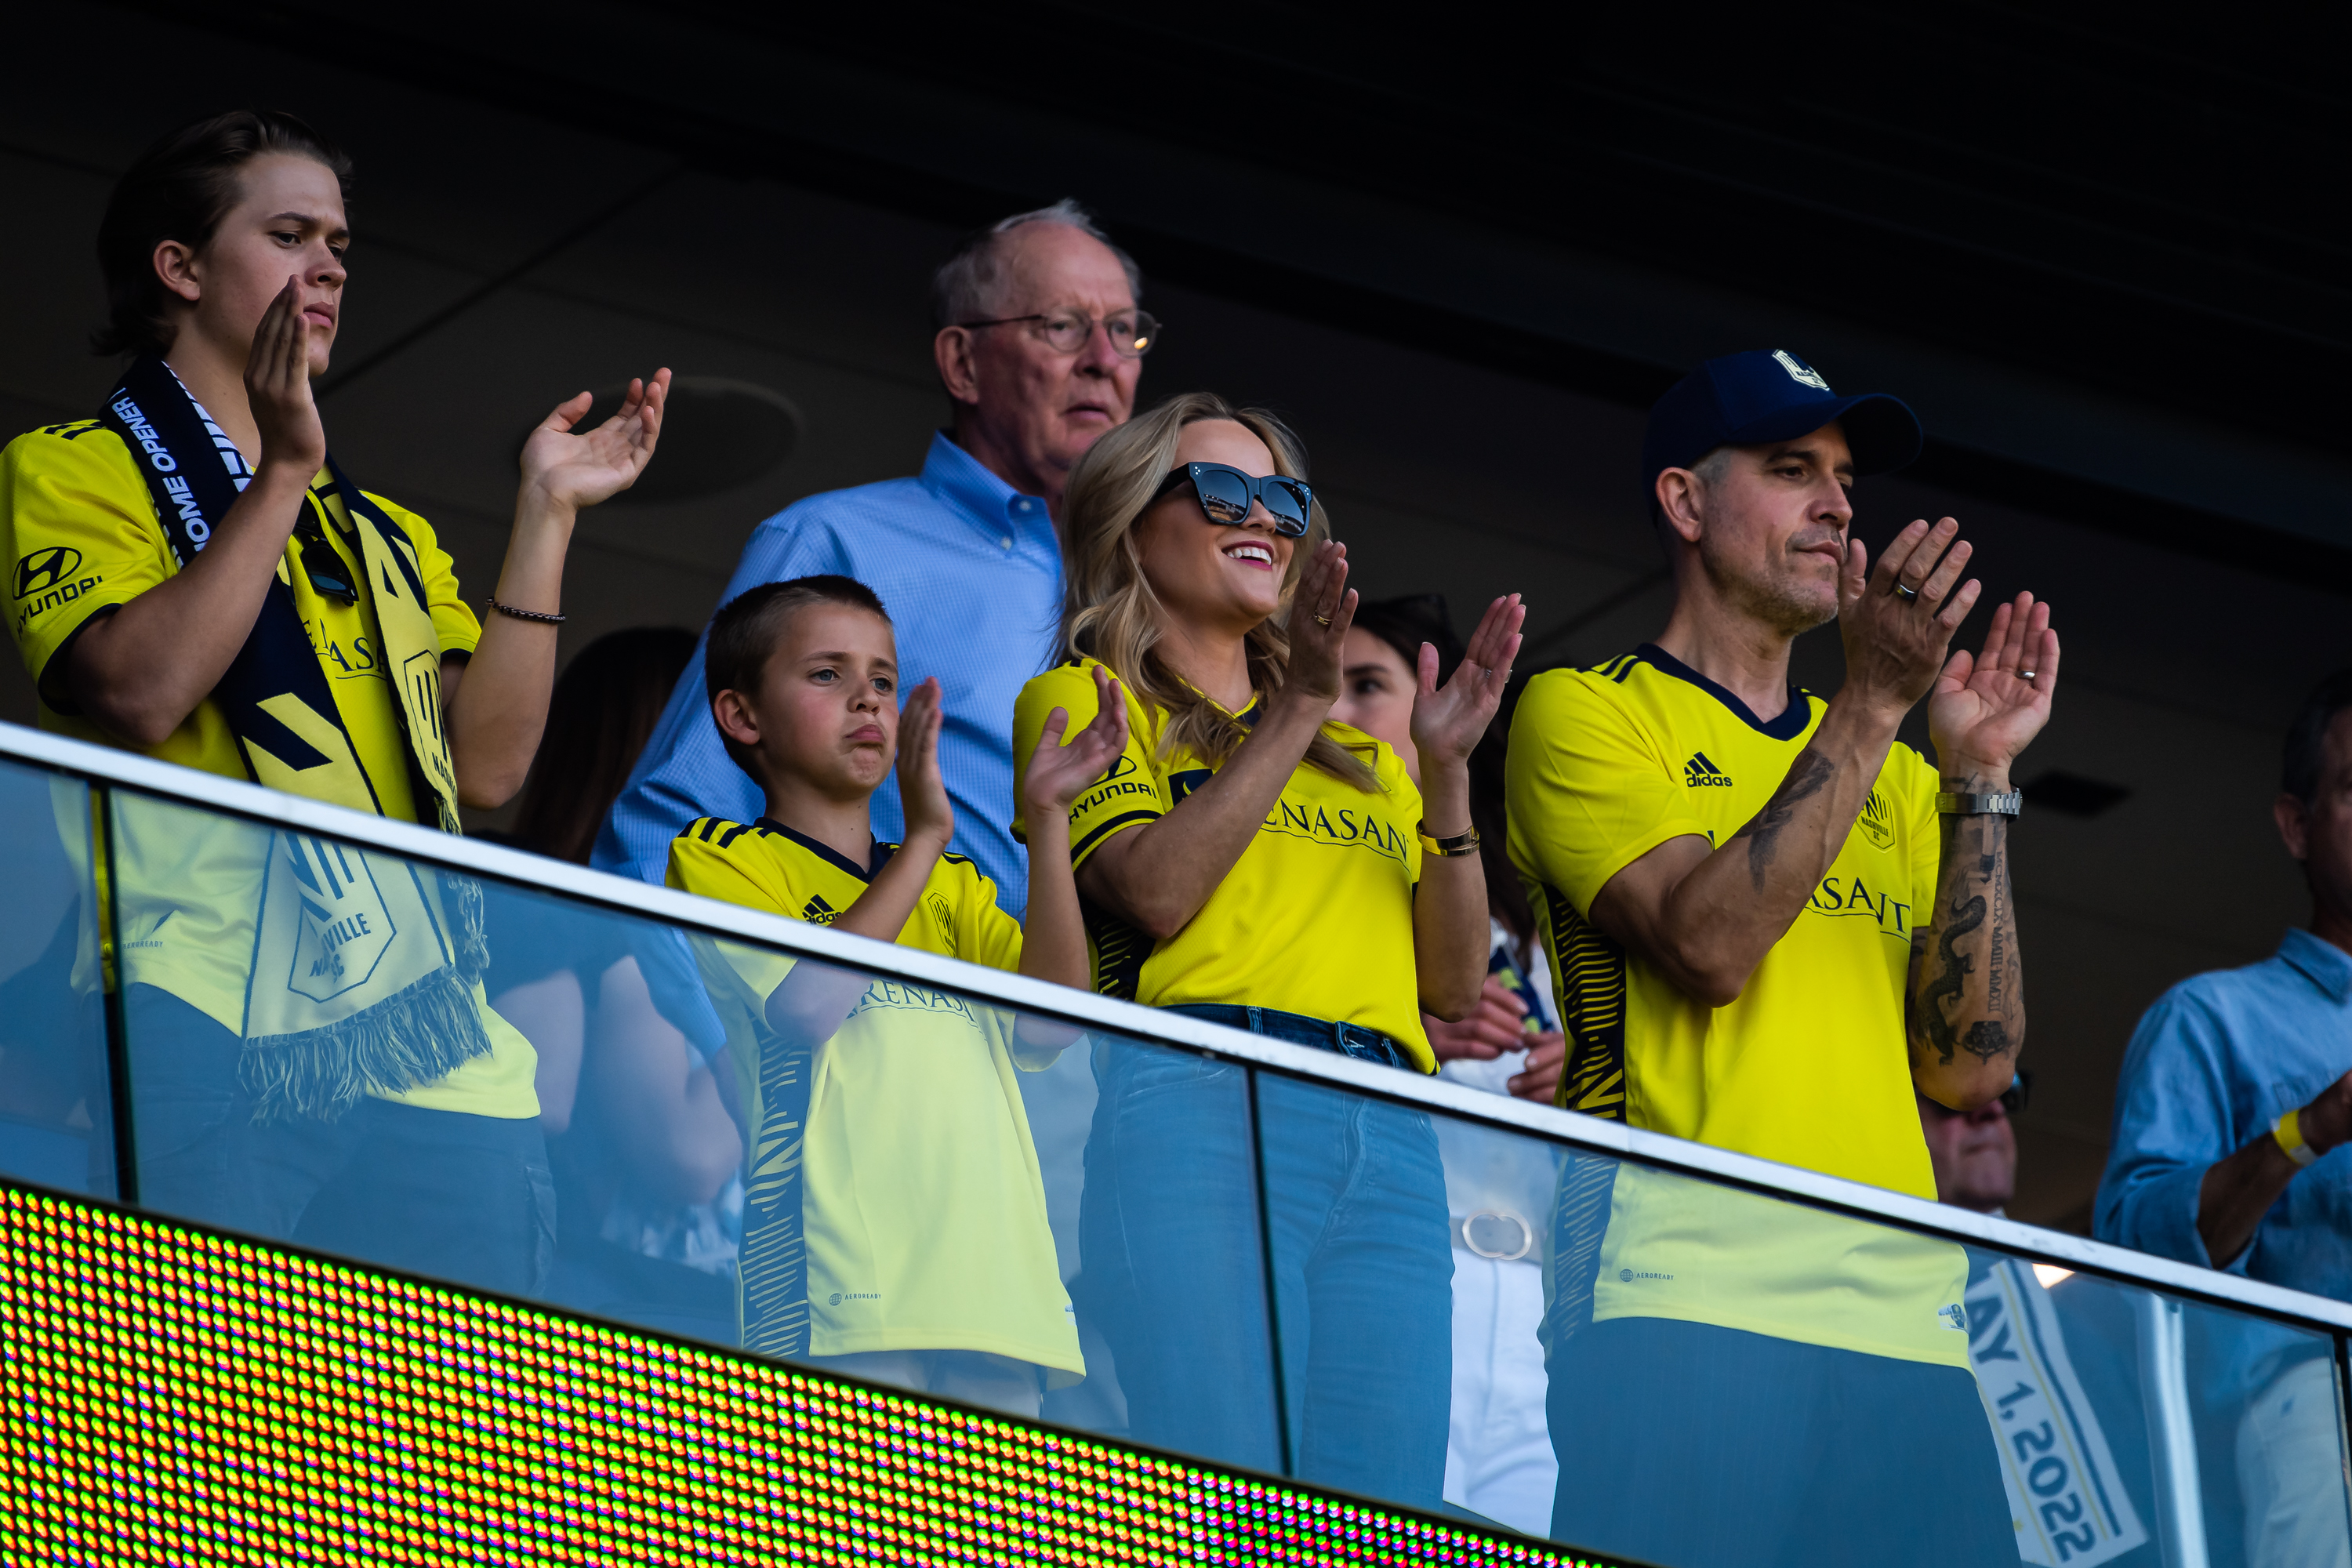 Reese Witherspoon (2nd from right,) with her sons Deacon Phillippe, Tennessee Toth and her husband Jim Toth, during the Inaugural home opener game between Philadelphia Union and Nashville SC at GEODIS Park, on May 1, 2022 in Nashville, Tennessee. | Source: Getty Images